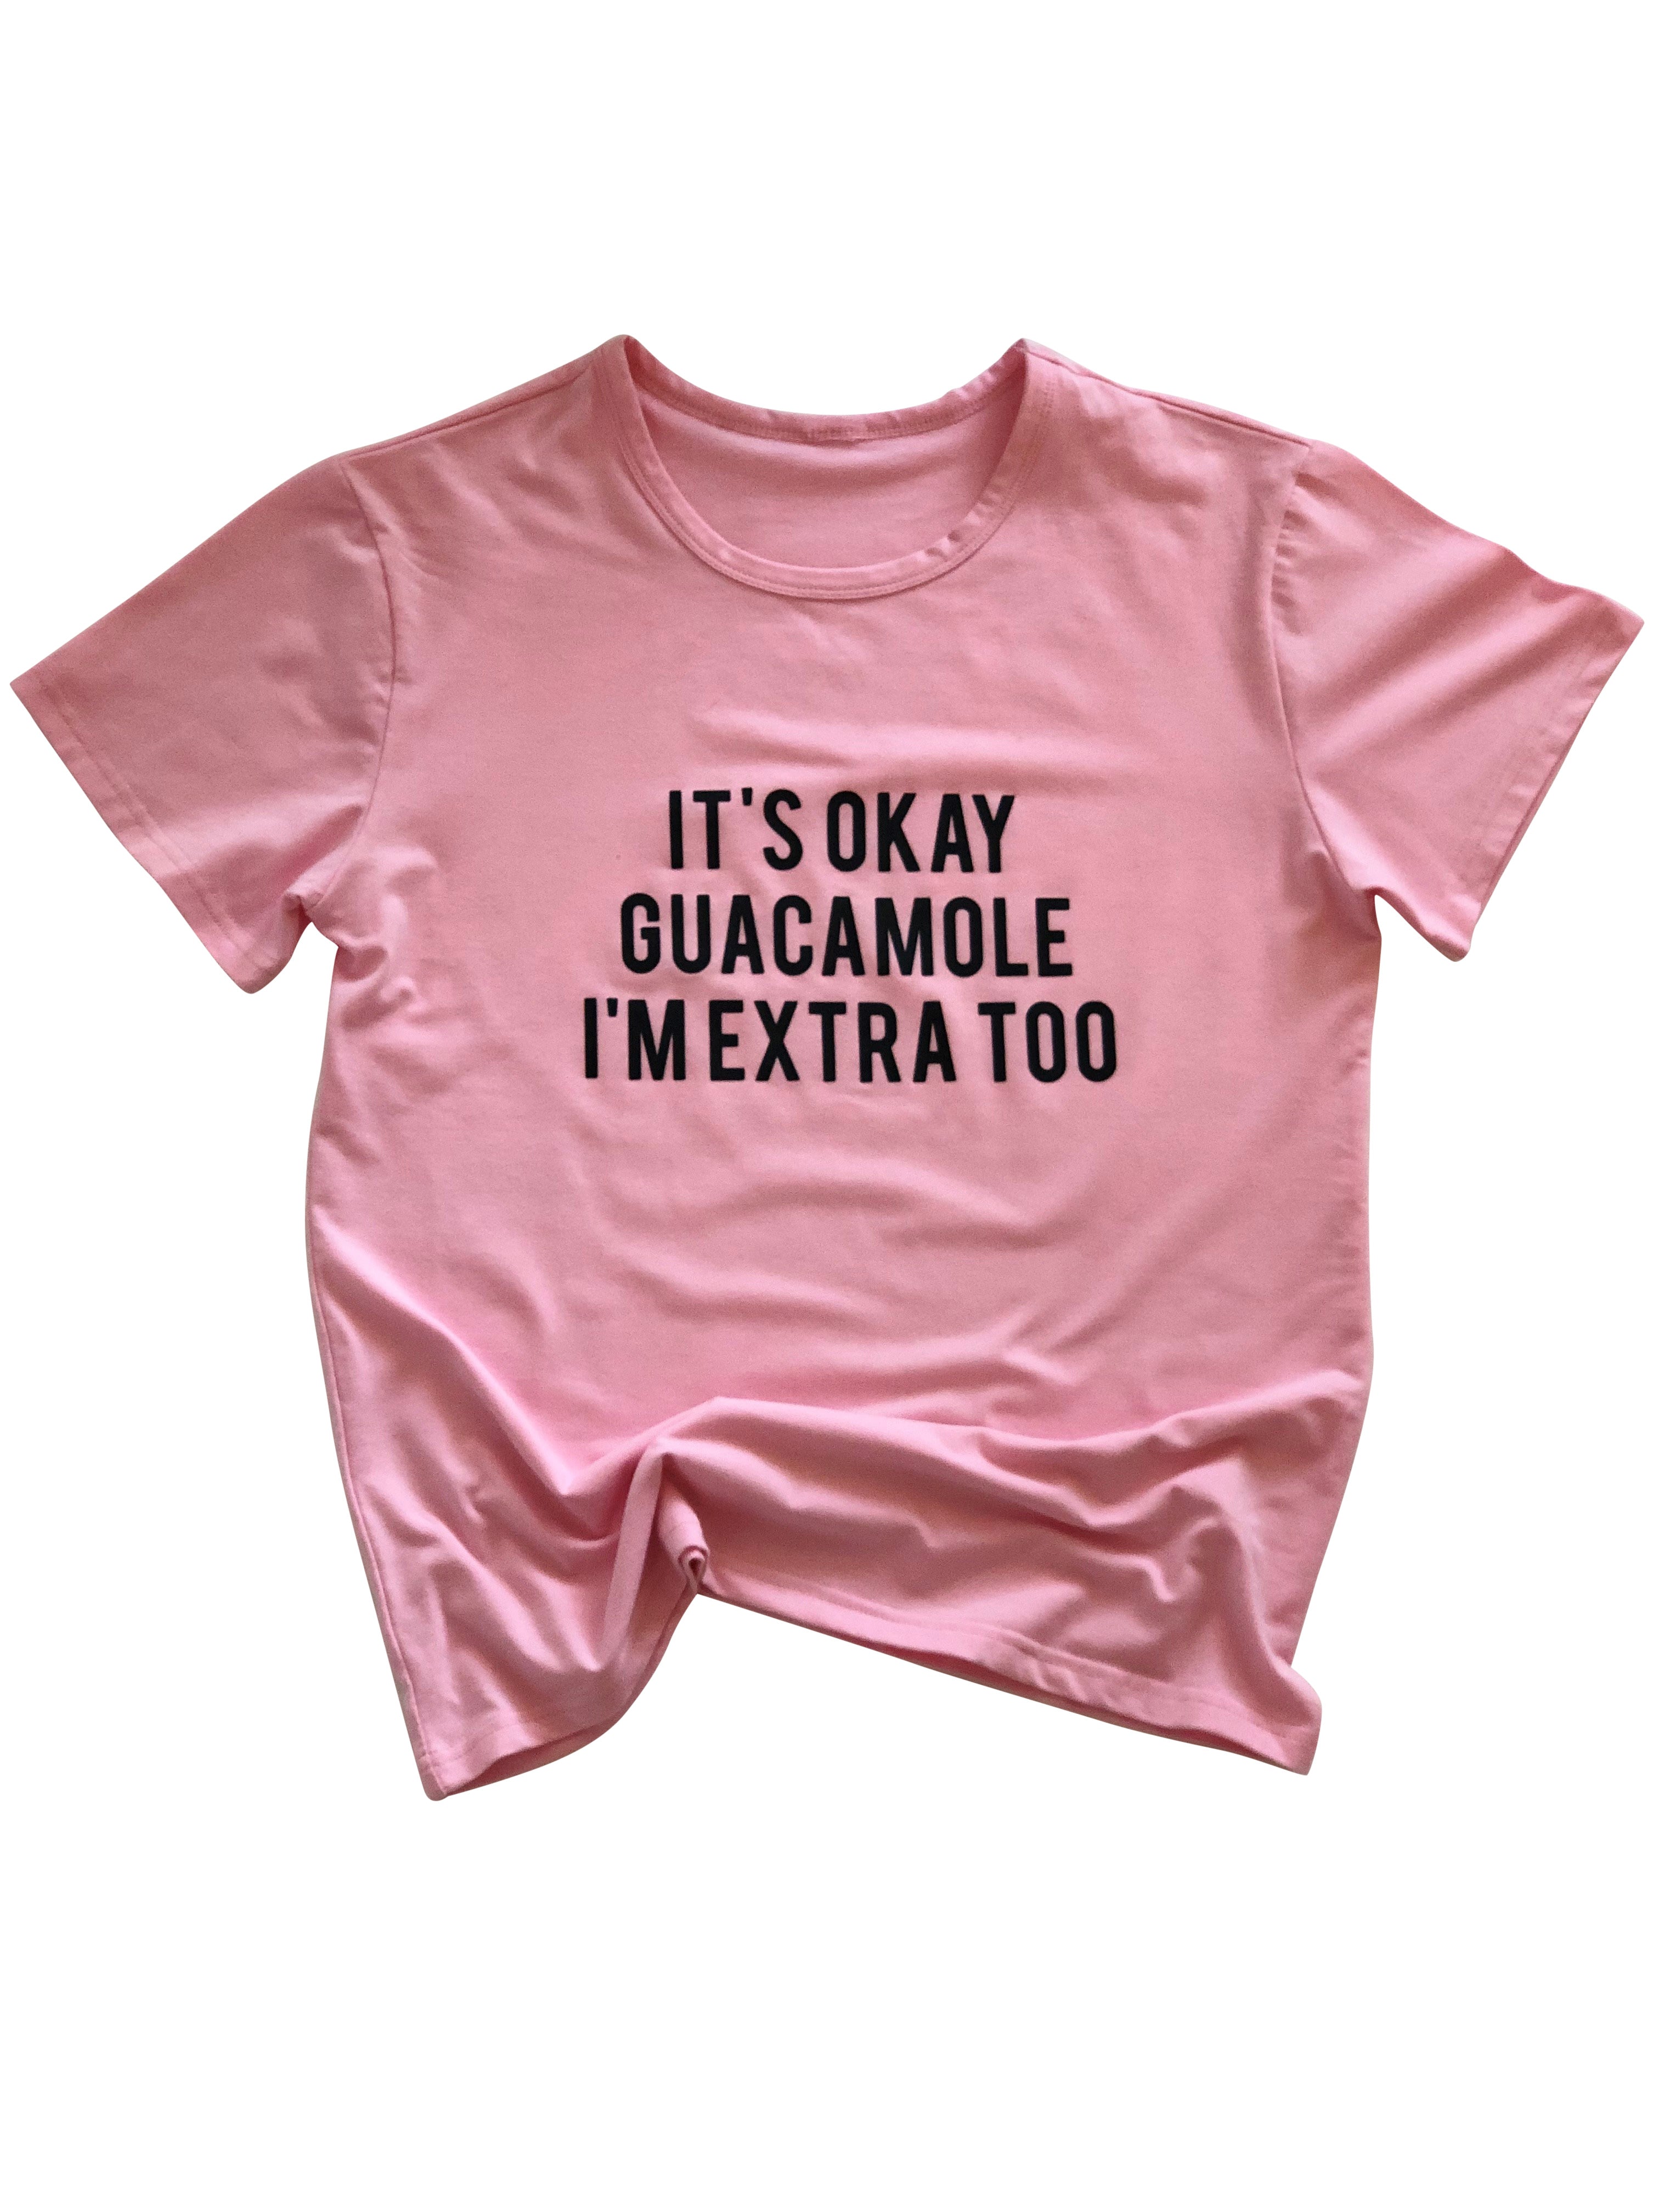 Extra Guac Shirt in Pink - Trunk Series